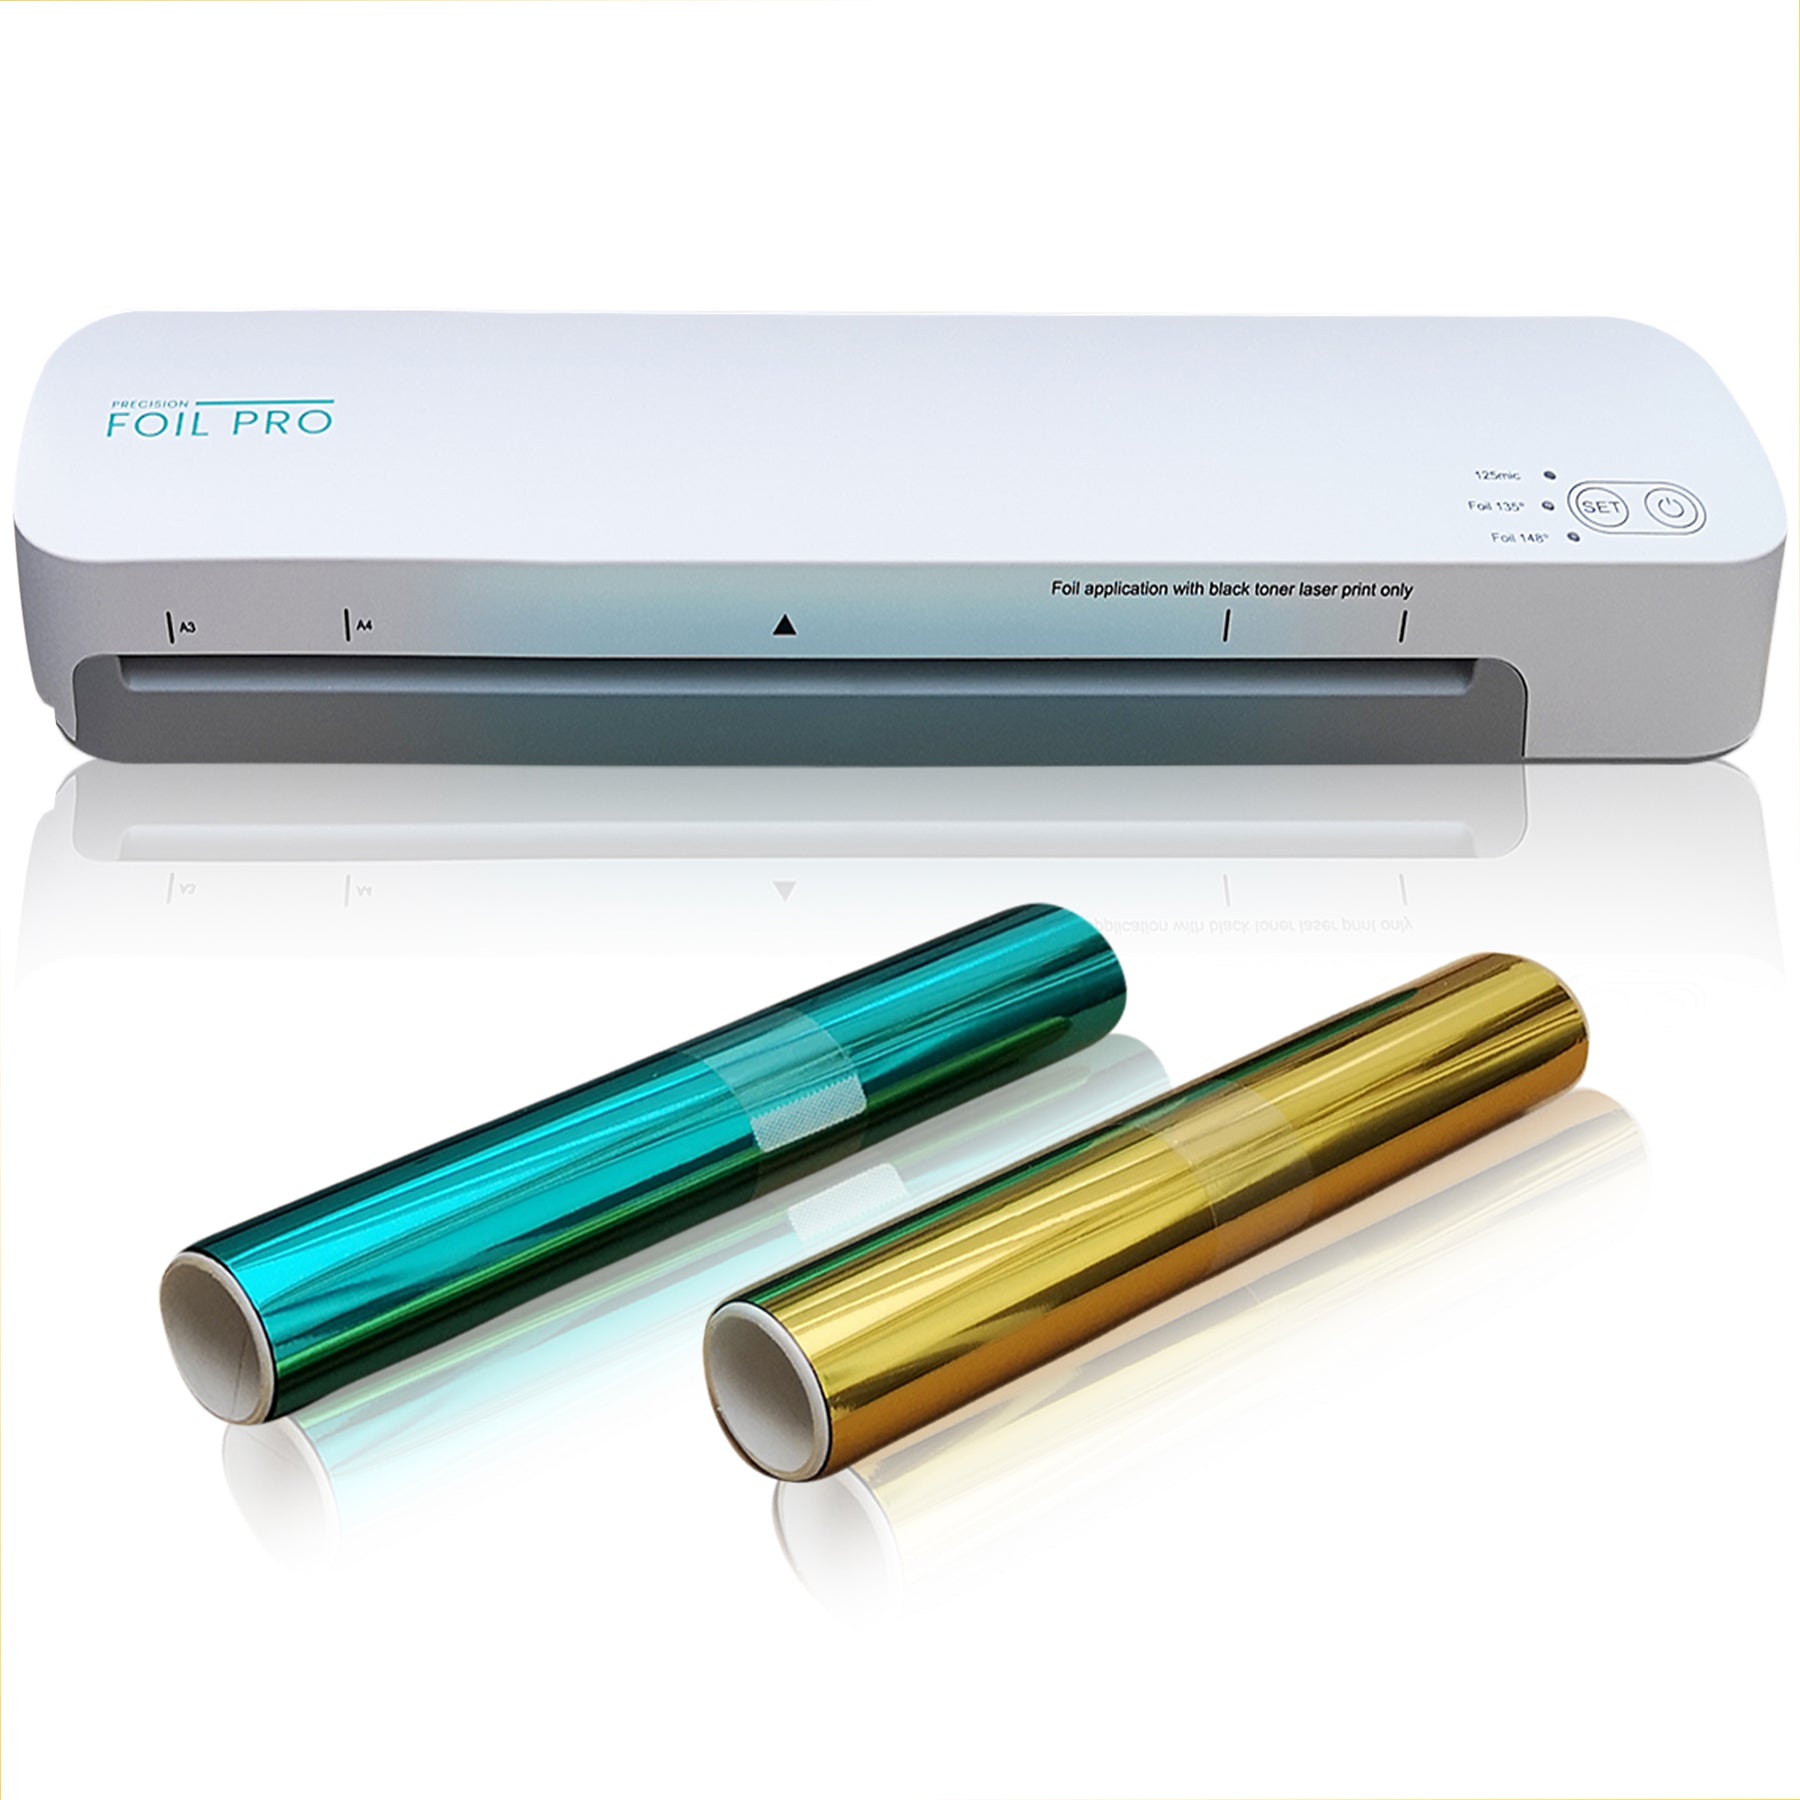 Precision Foil Pro - The Ultimate 2-in-1 Foil Applicator and Laminator for Crafting Enthusiasts